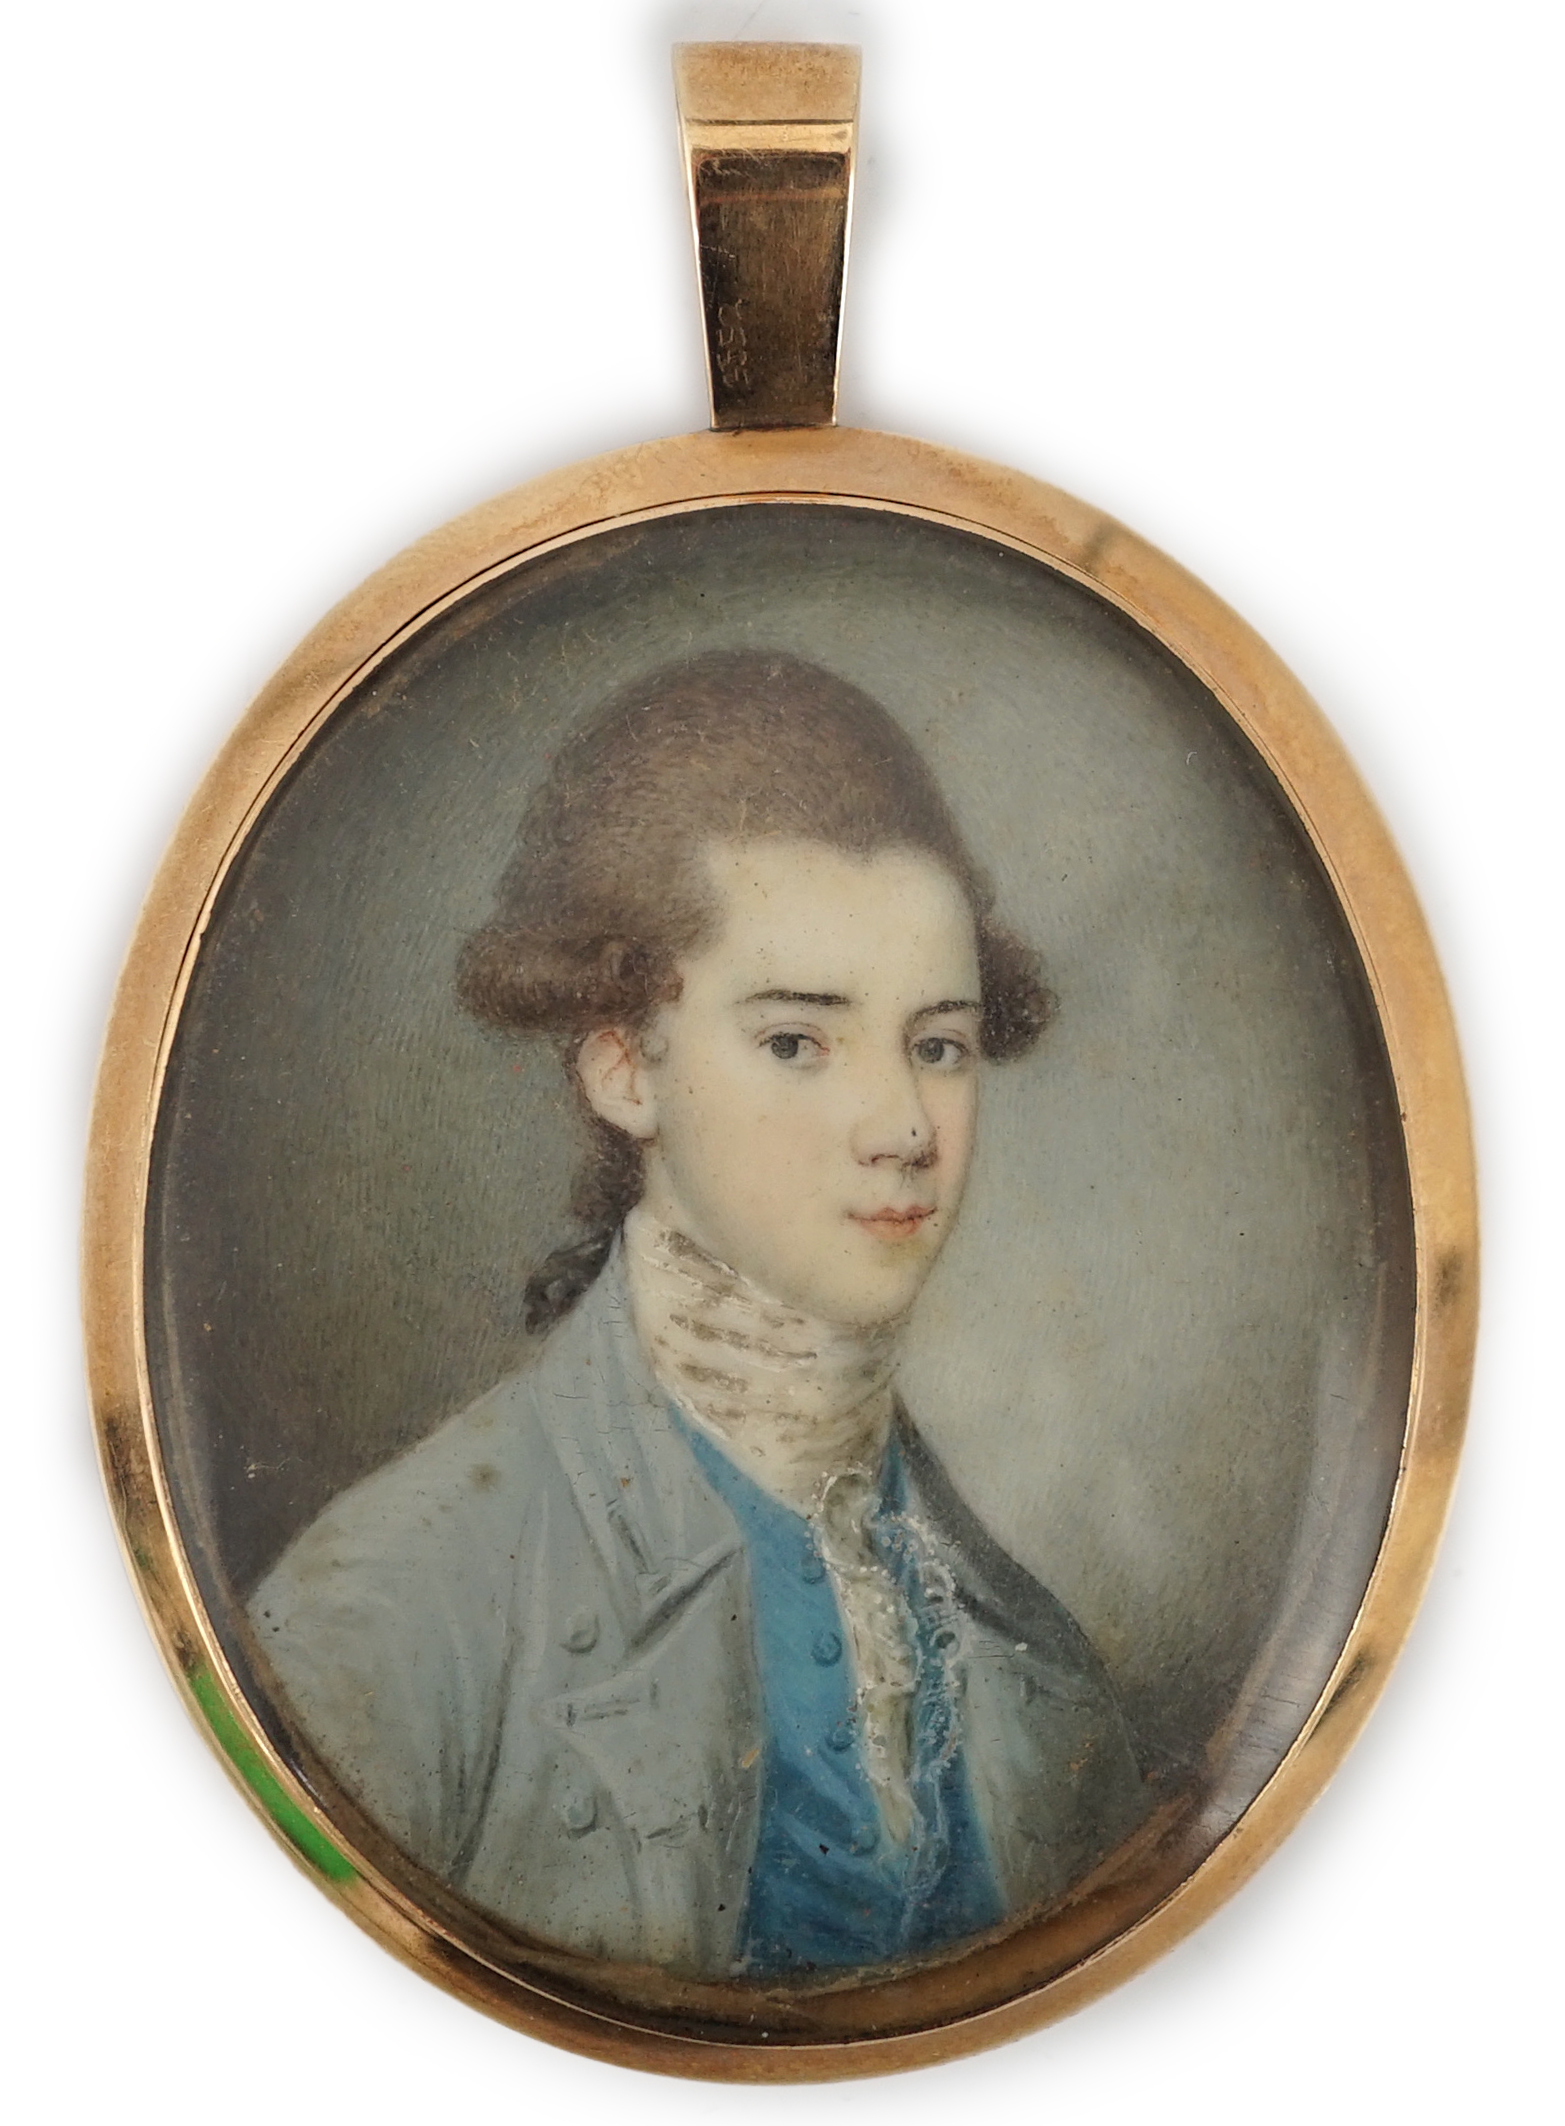 English School circa 1800, Portrait miniature of a young man, oil on ivory, 5.4 x 4.4cm. CITES Submission reference JKK4W6C4